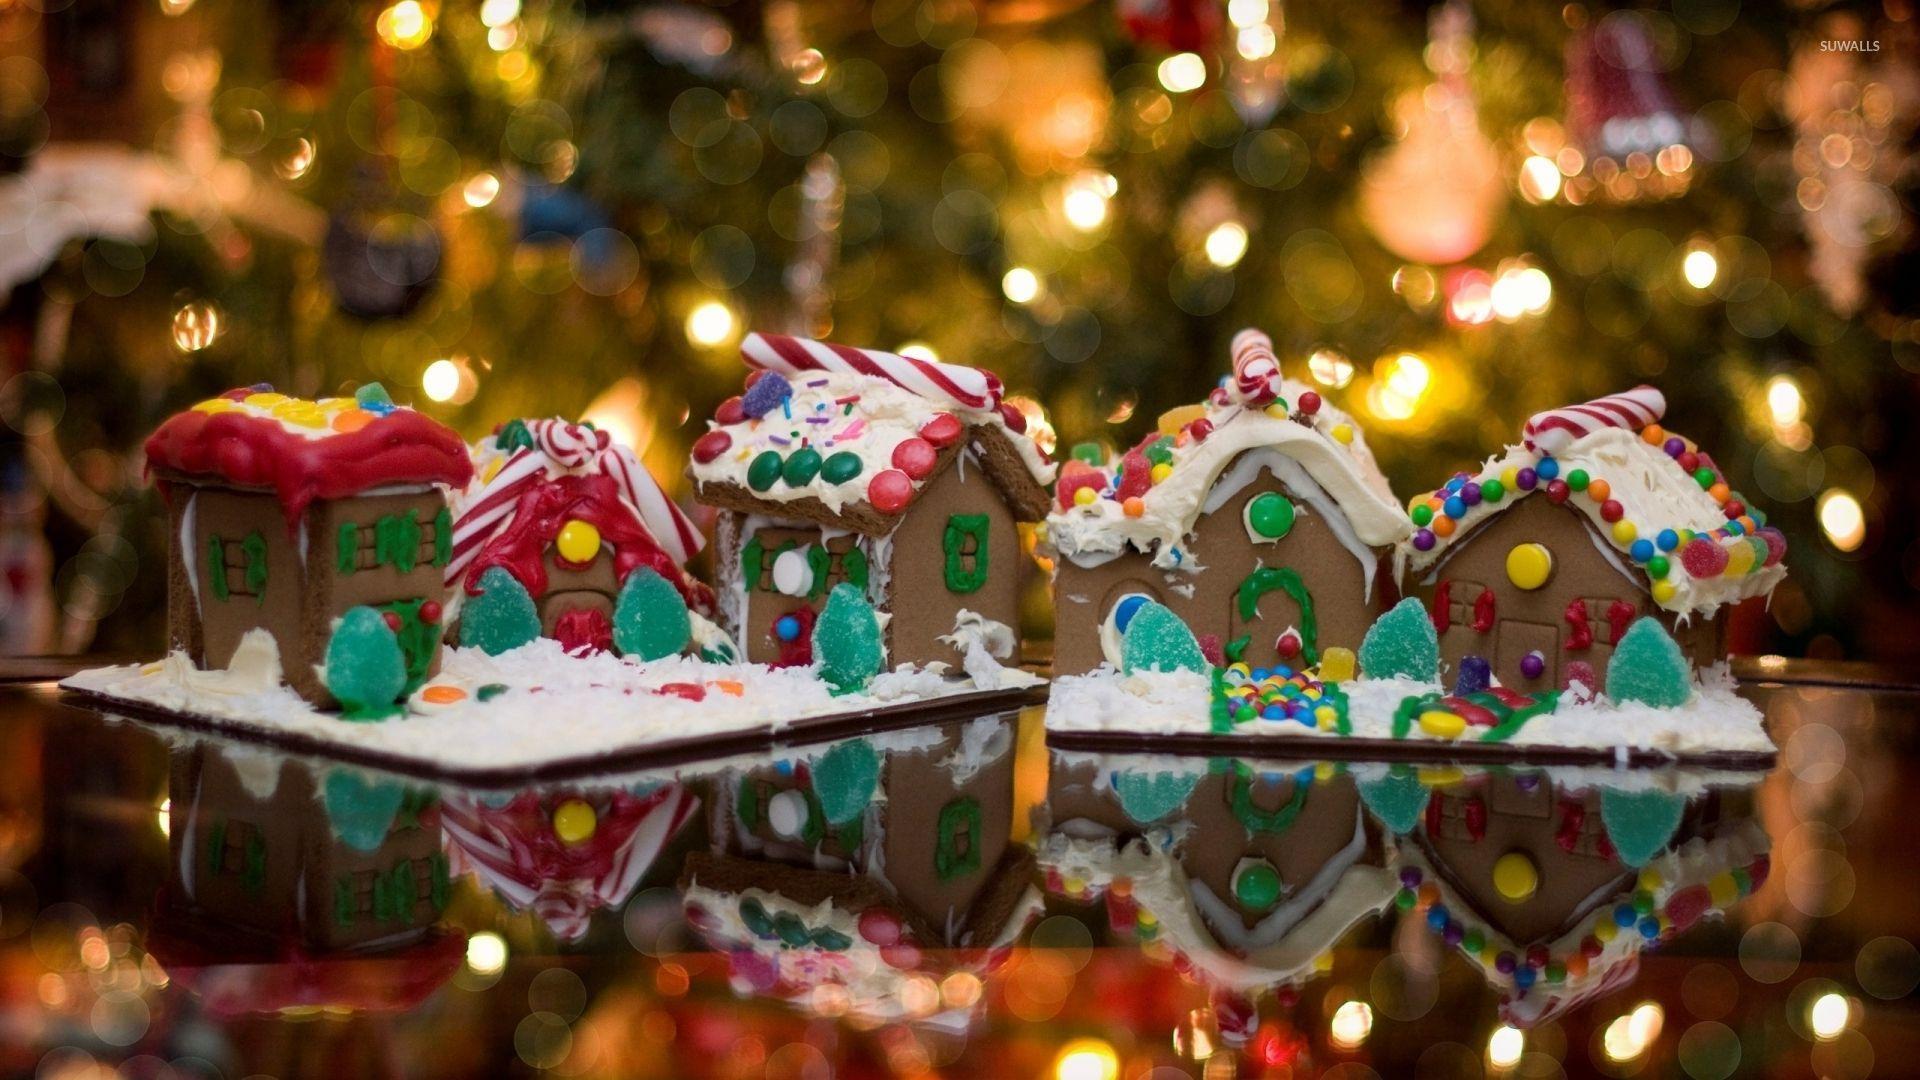 Gingerbread houses in front of the Christmas tree wallpaper